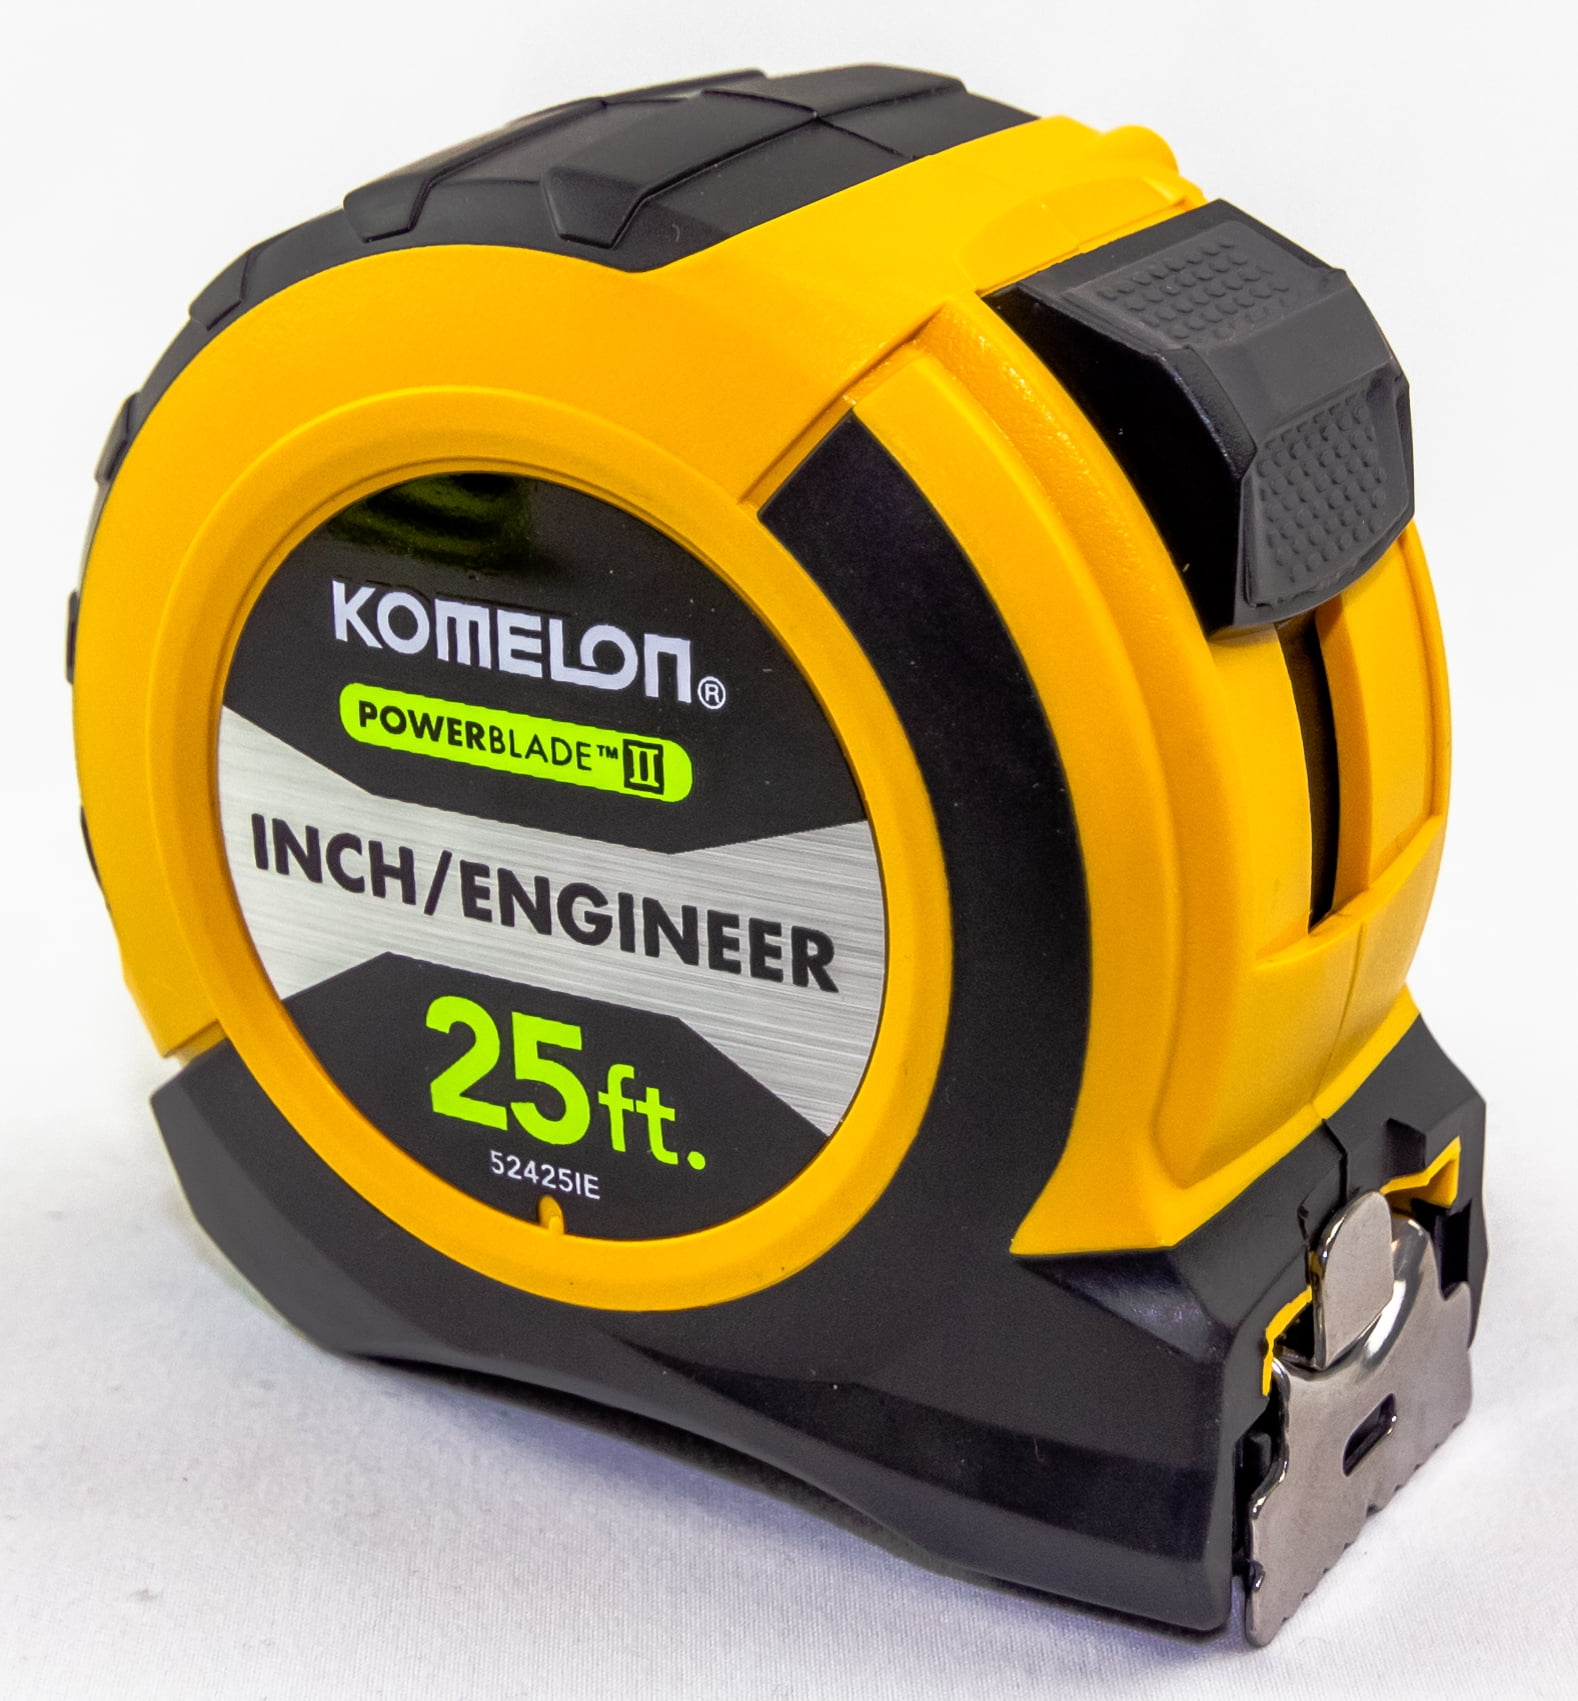 Komelon Tape Measure High-Visibility both Inch and Engineer Scale Printed 33Ft 